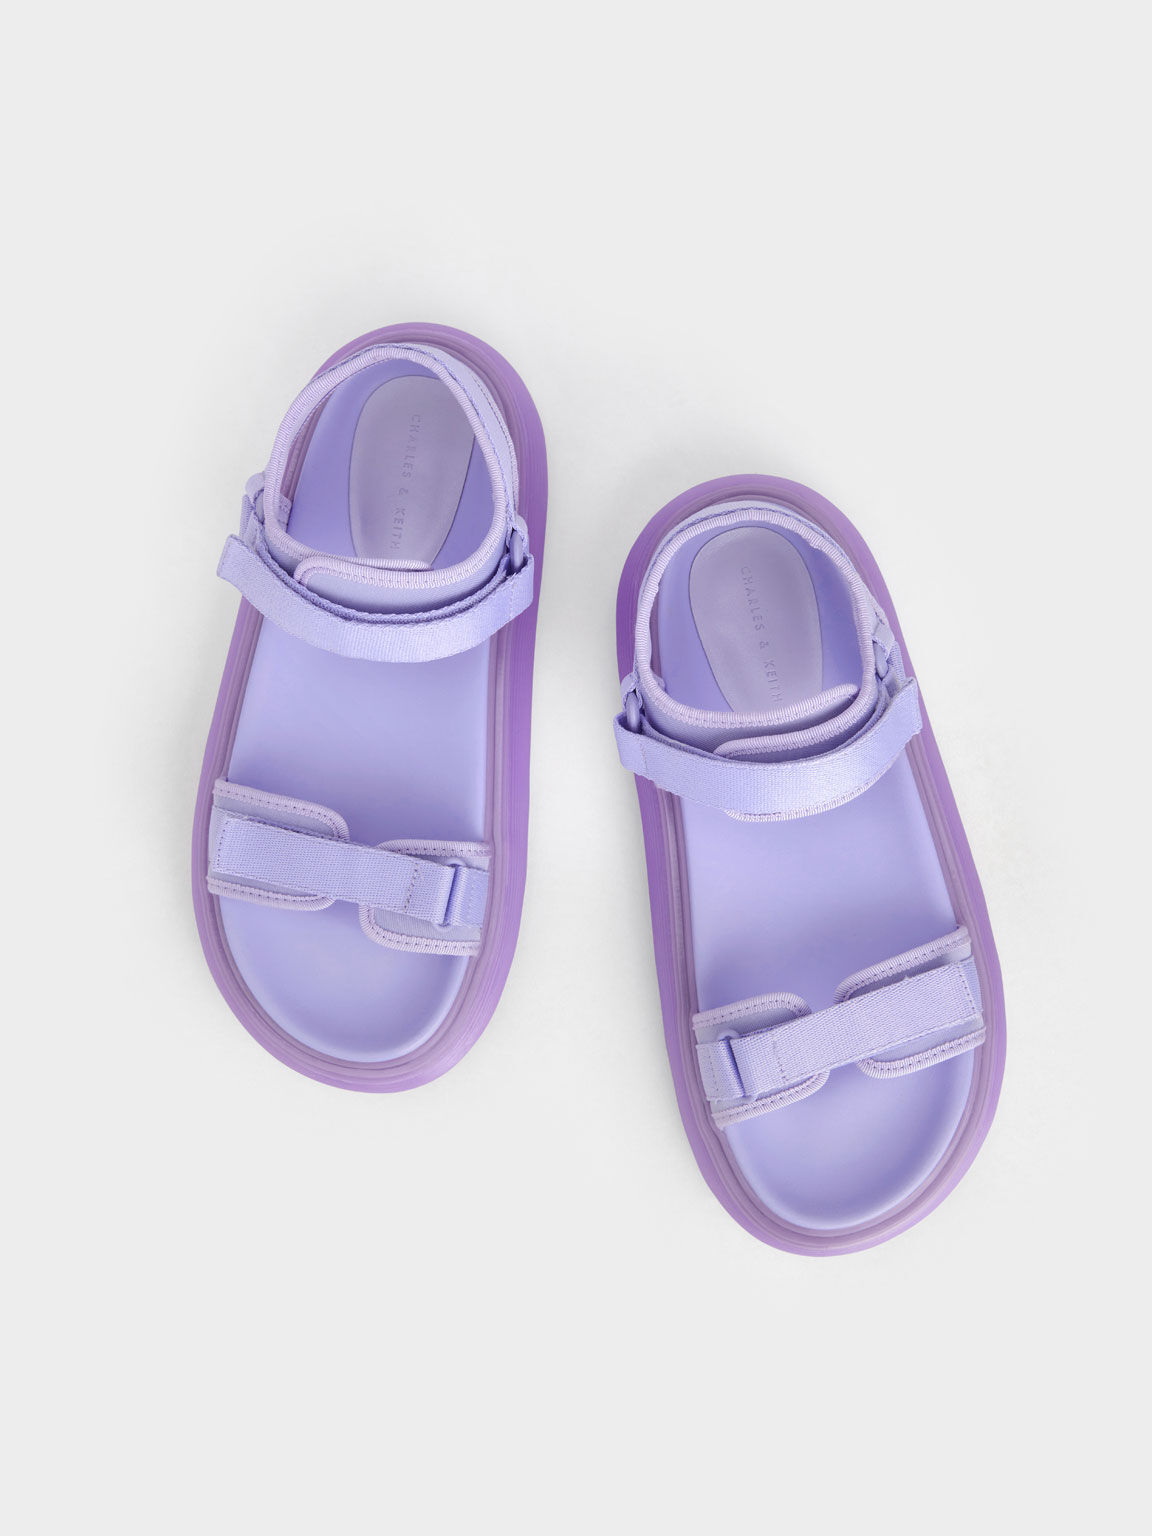 Sandal Sport Recycled Polyester Velcro-Strap, Lilac, hi-res